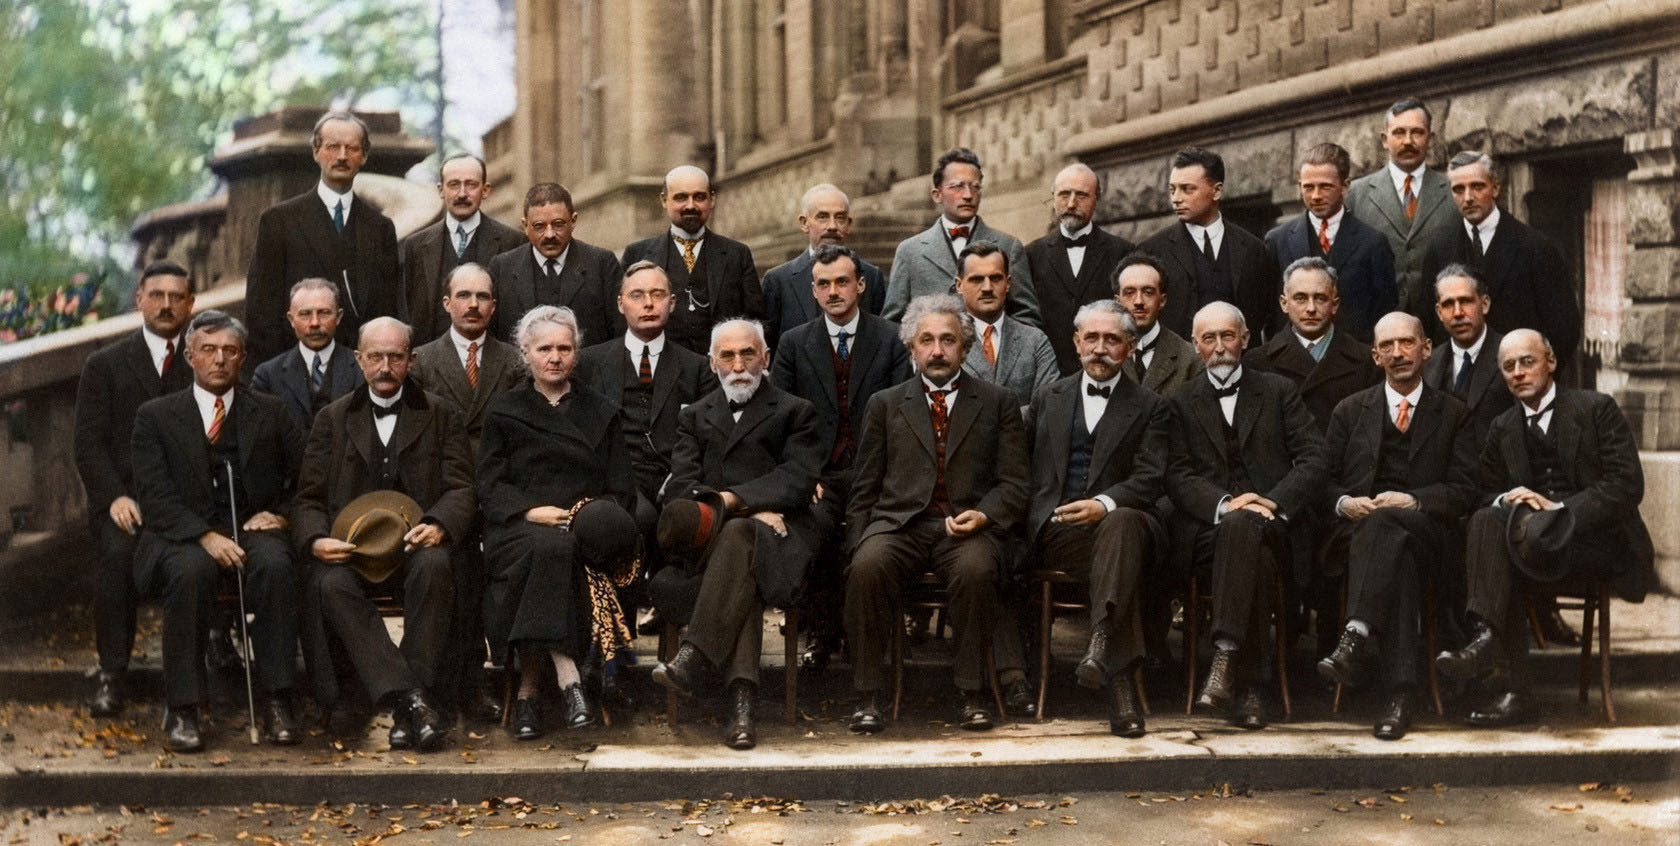 Probably the most intelligent picture ever taken, the 1927 Solvay conference featuring Einstein, Dirac, Pauli, Marie Curie, Bohr, Schrodinger and many more of the scientific greats.